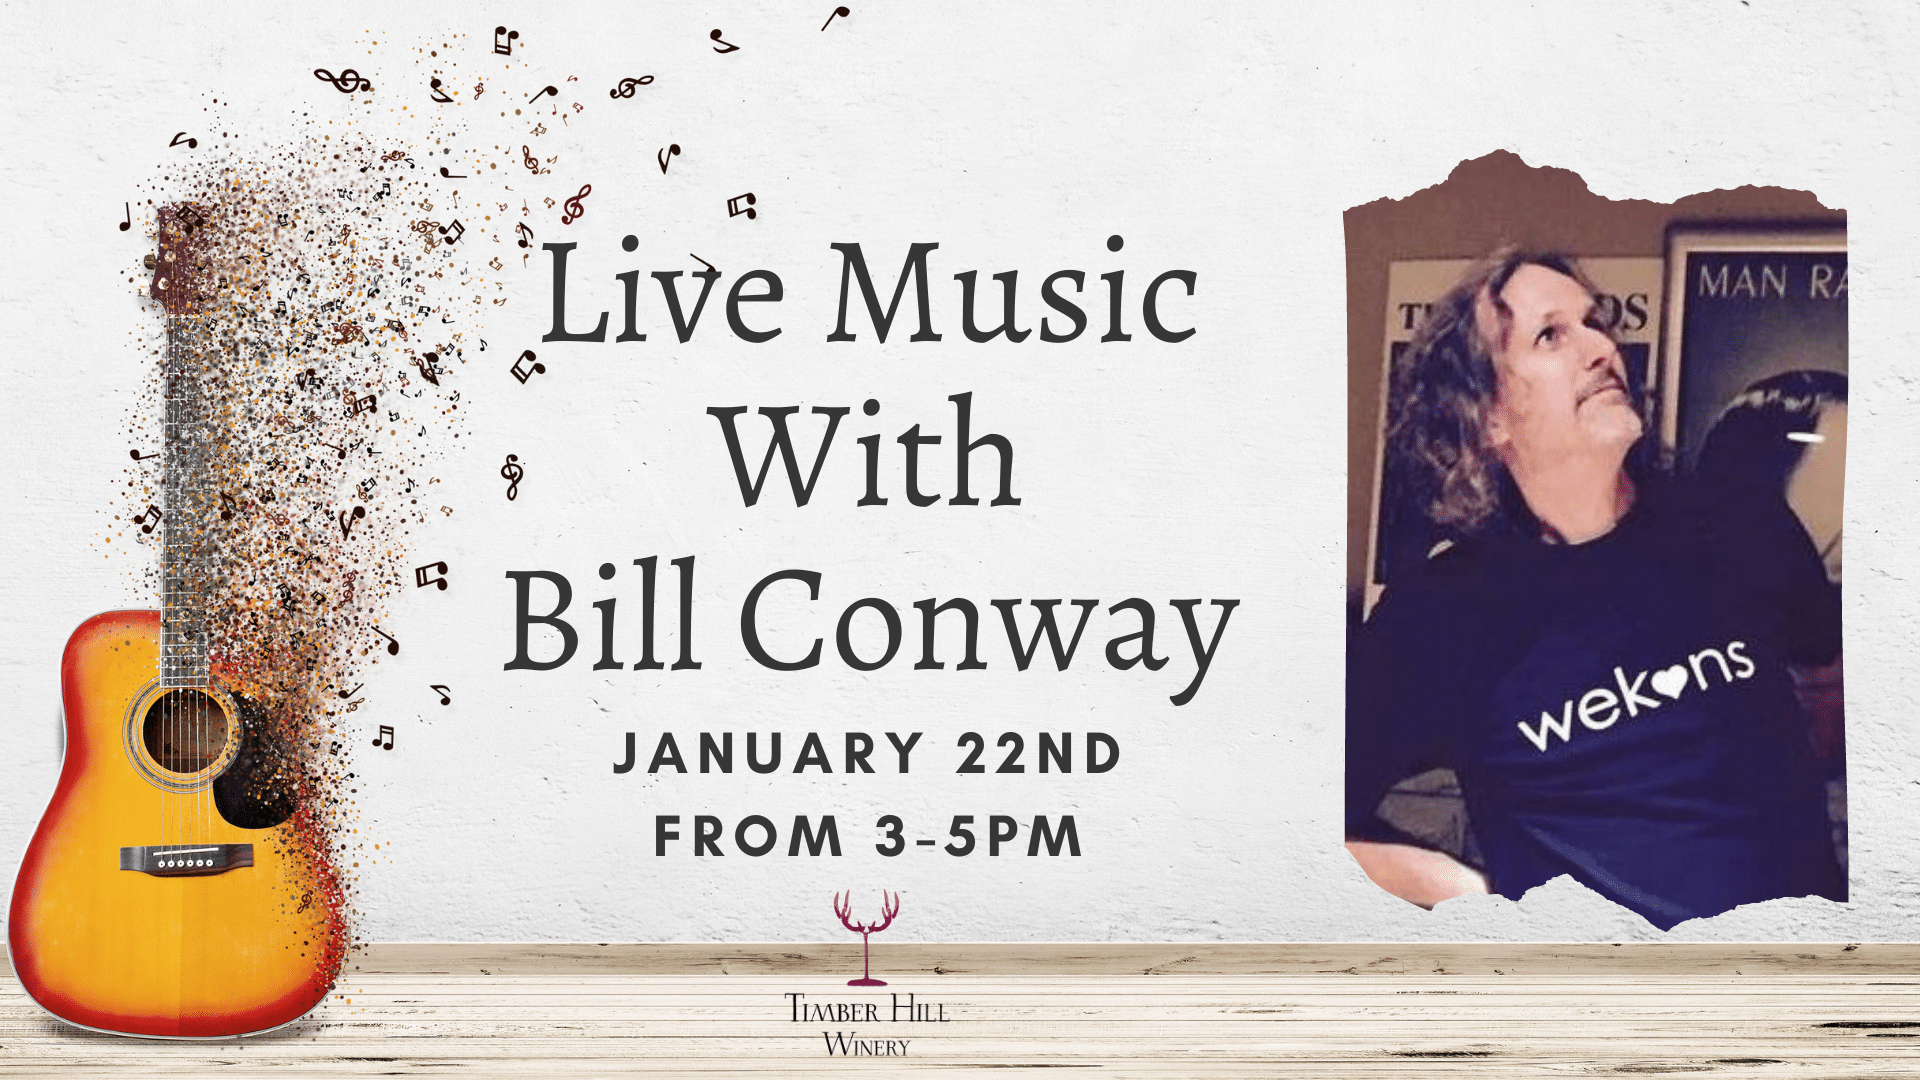 Live Music With Bill Conway